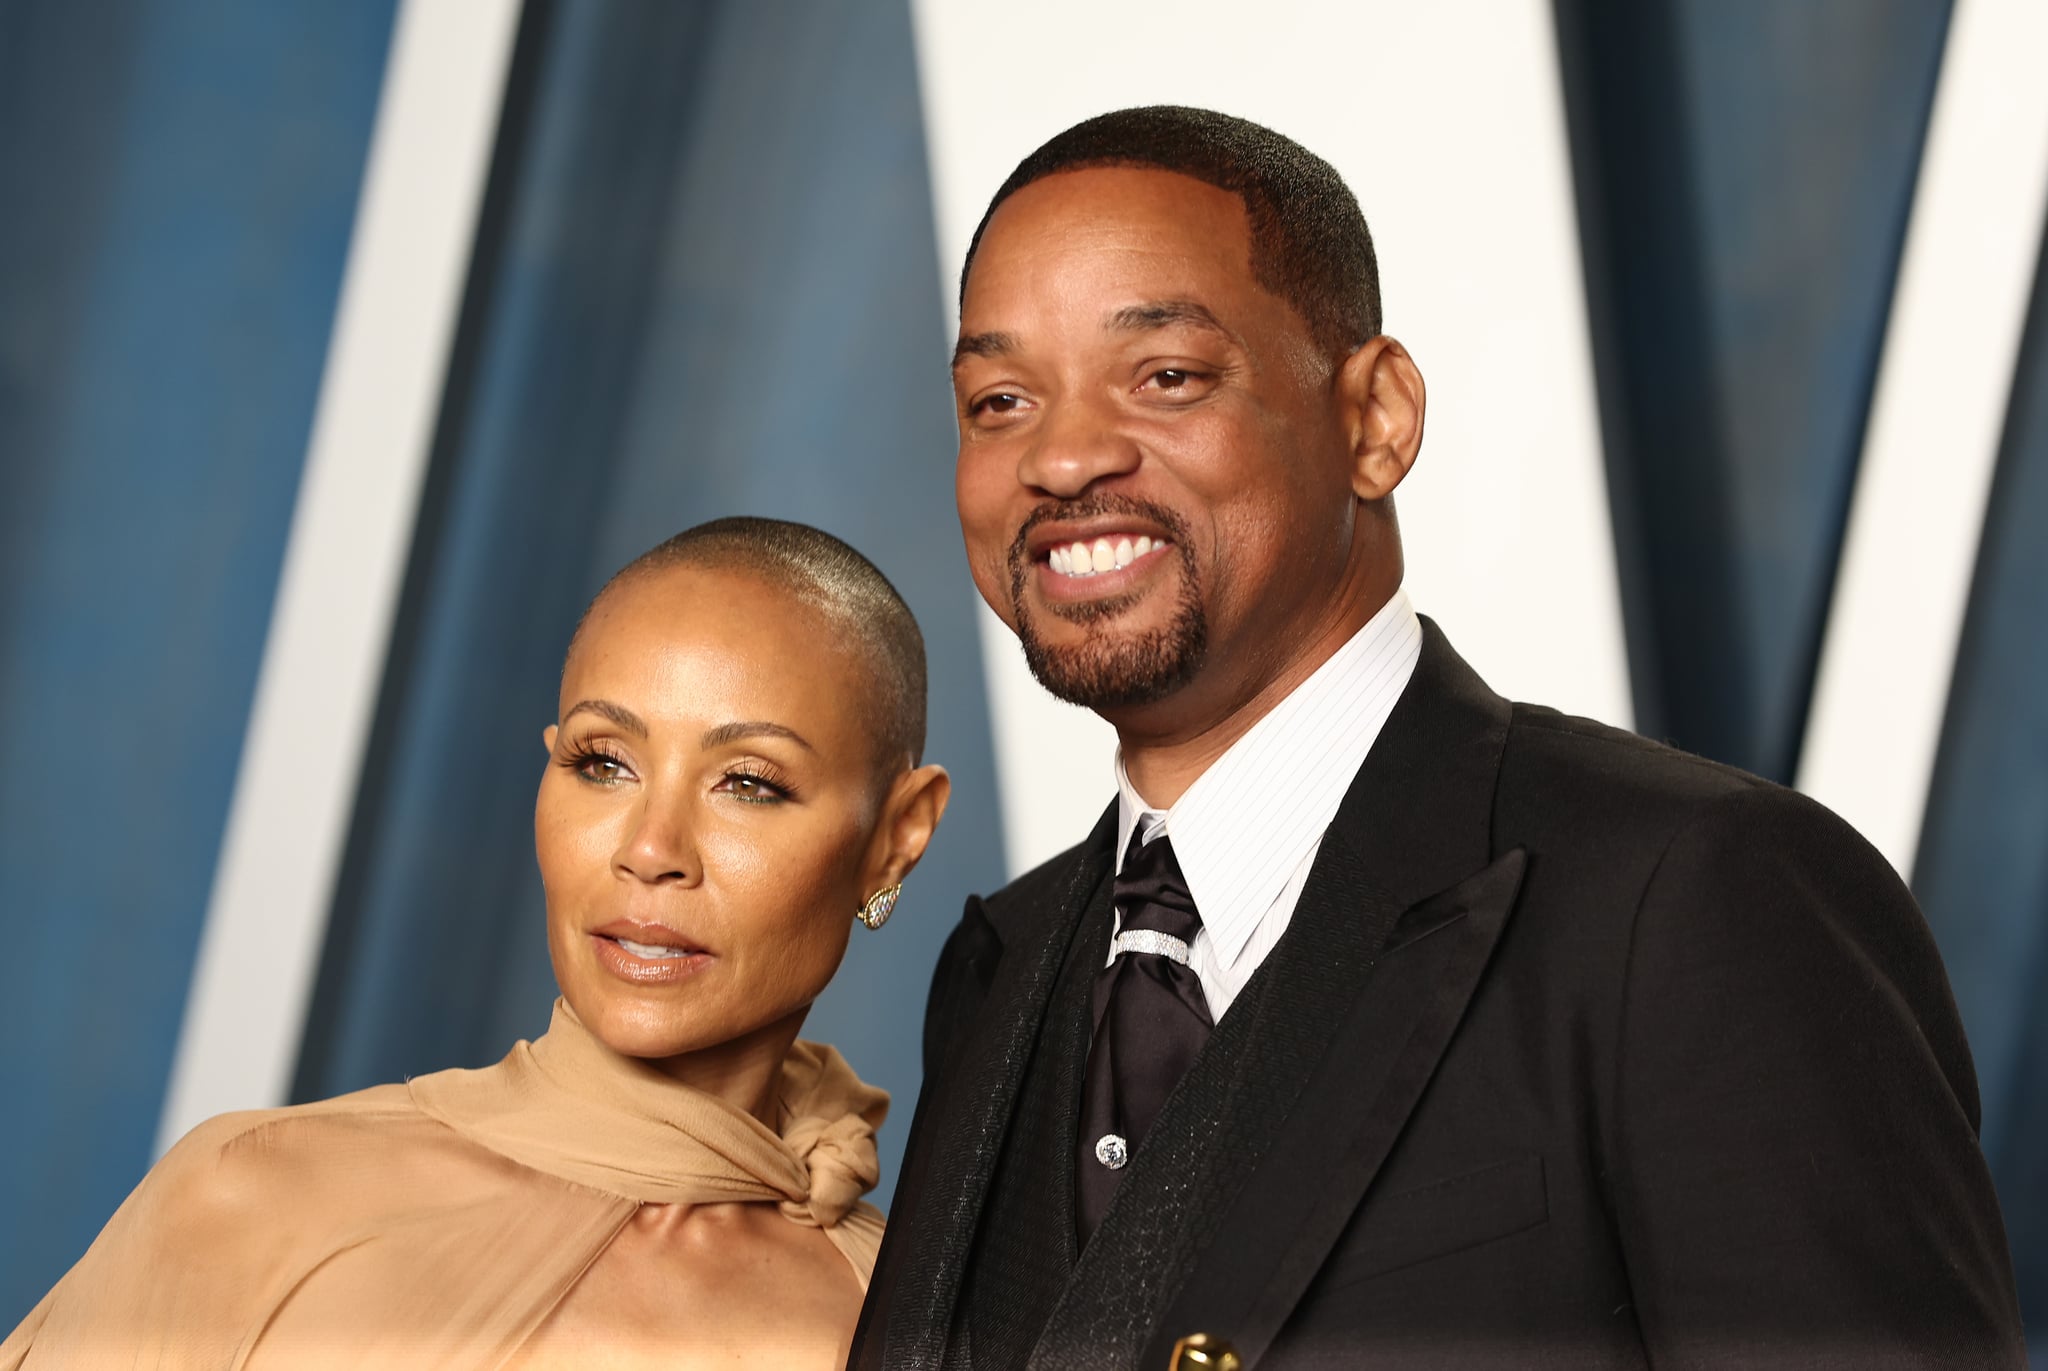 BEVERLY HILLS, CALIFORNIA - MARCH 27: (L-R) Jada Pinkett Smith and Will Smith attend the 2022 Vanity Fair Oscar Party Hosted By Radhika Jones at Wallis Annenberg Center for the Performing Arts on March 27, 2022 in Beverly Hills, California. (Photo by Arturo Holmes/FilmMagic)